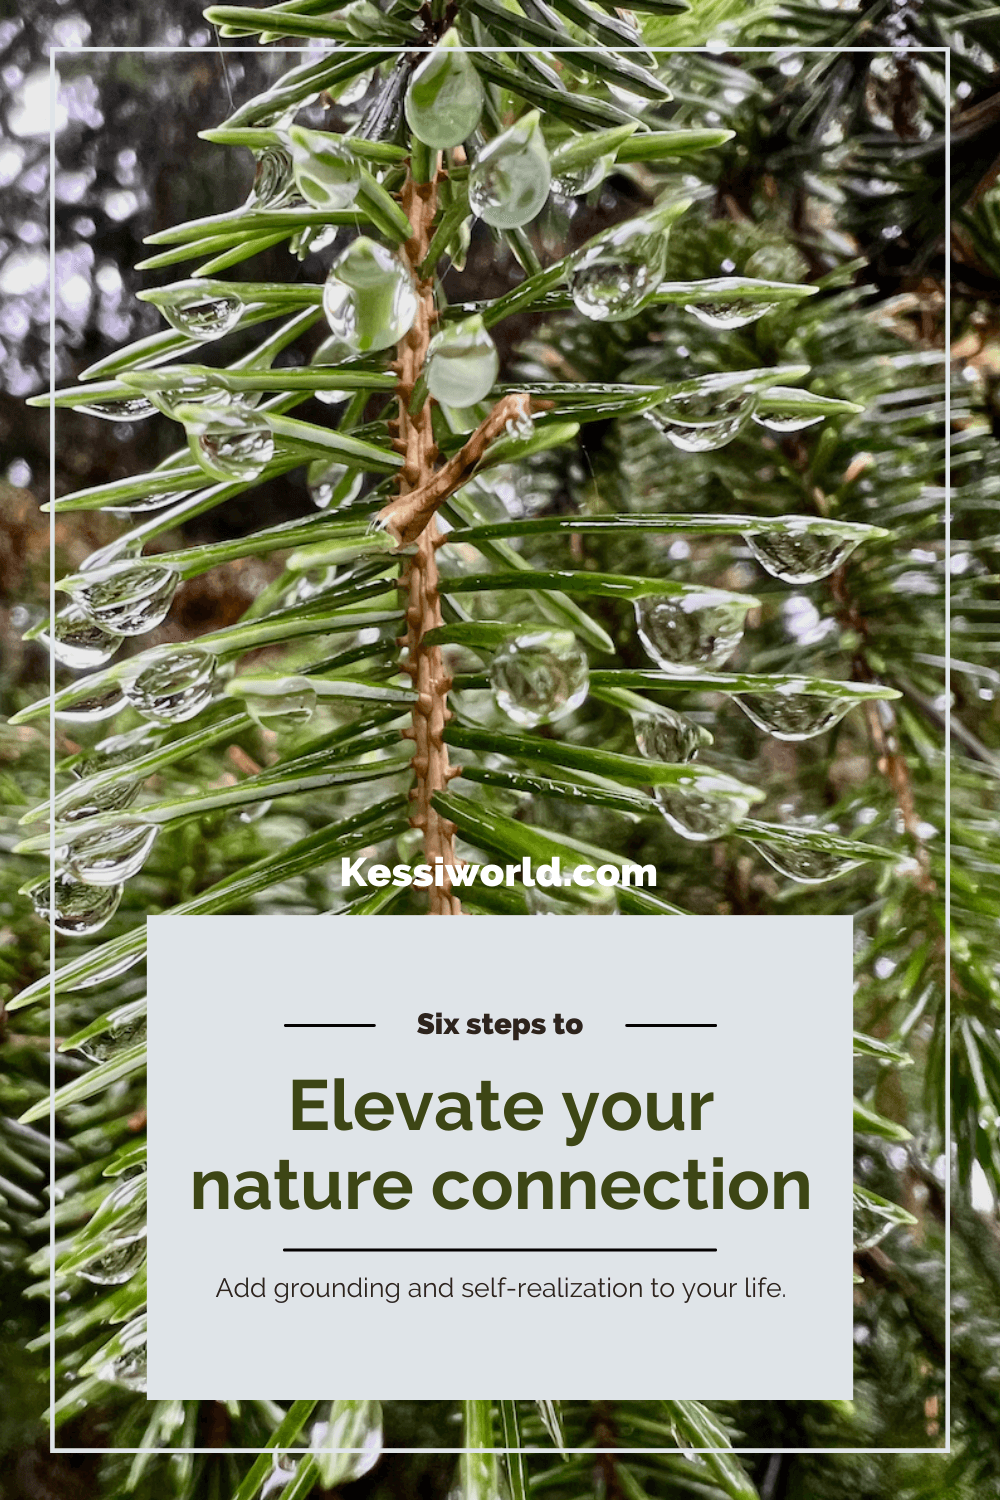 Pinterest tile outlining how to Elevate your nature connection.